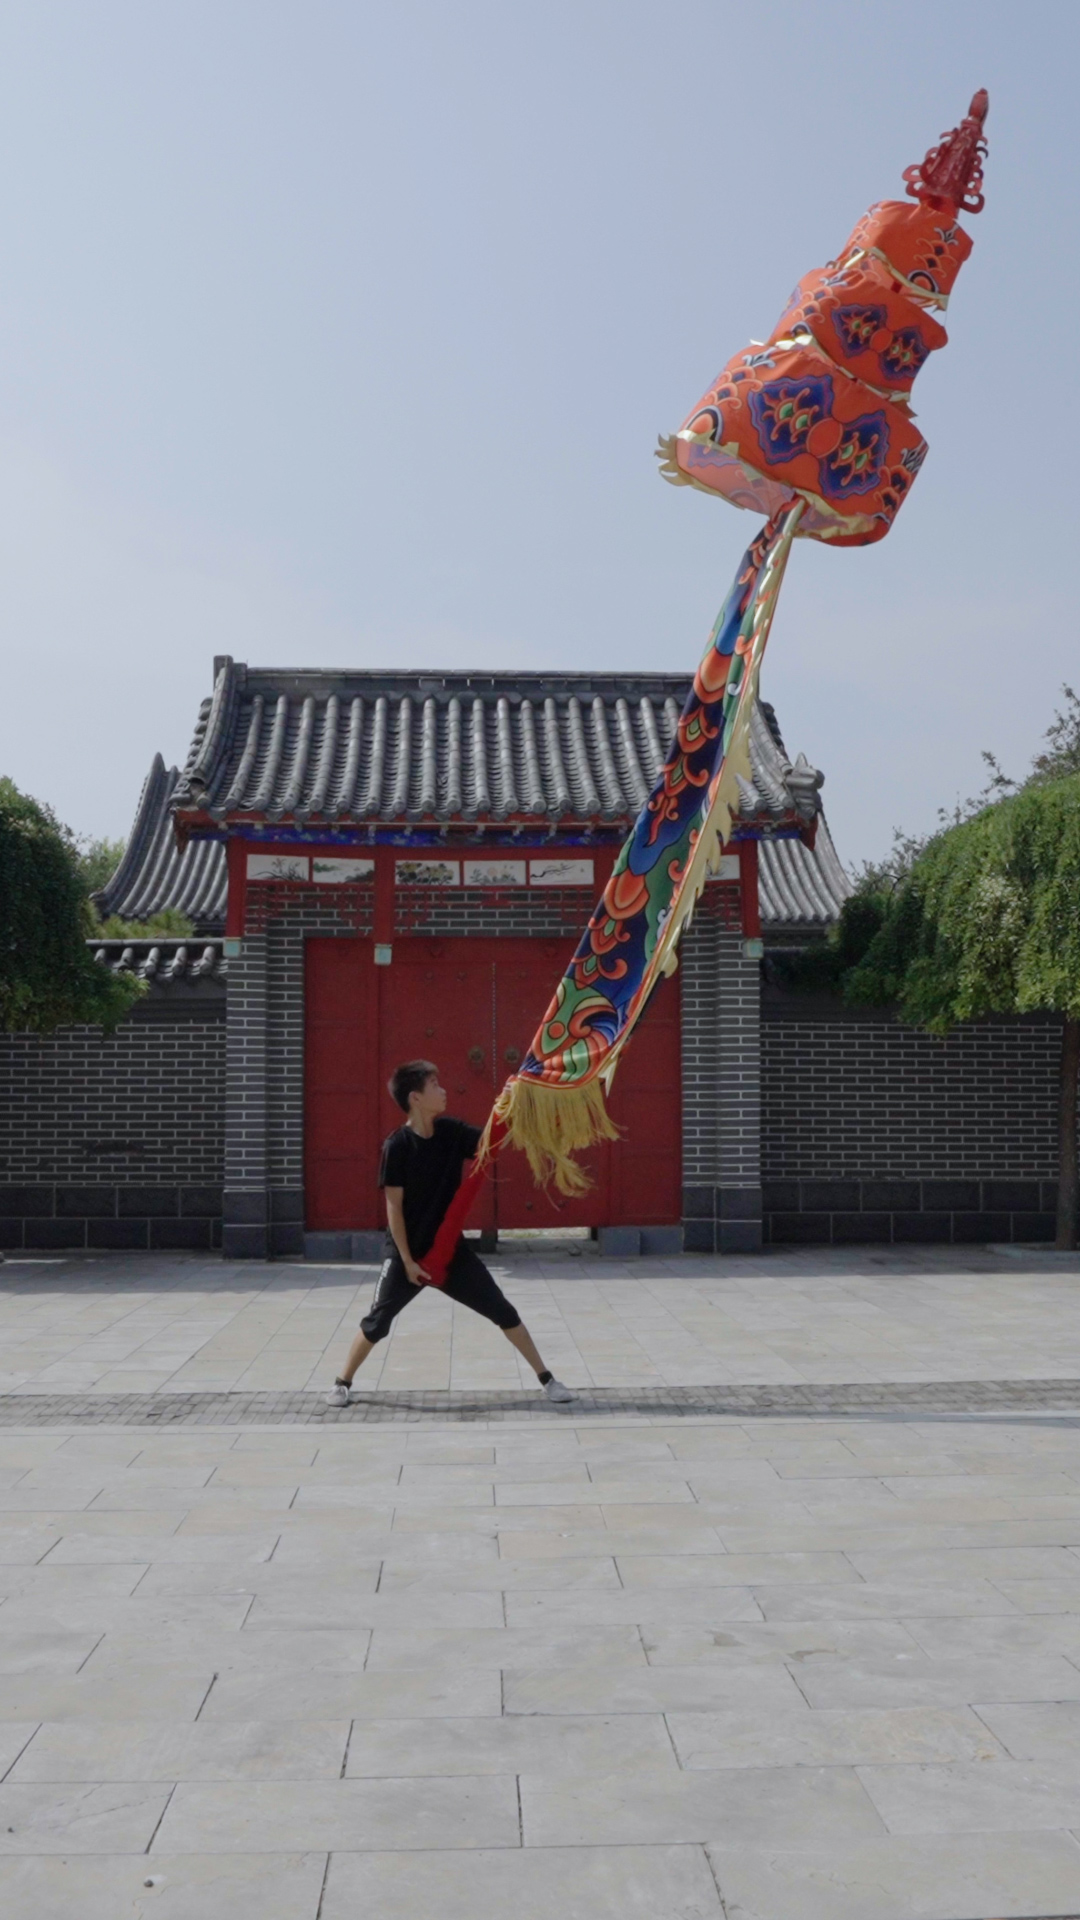 Zhongfan, the millennium-old acrobatic art form with a young inheritor